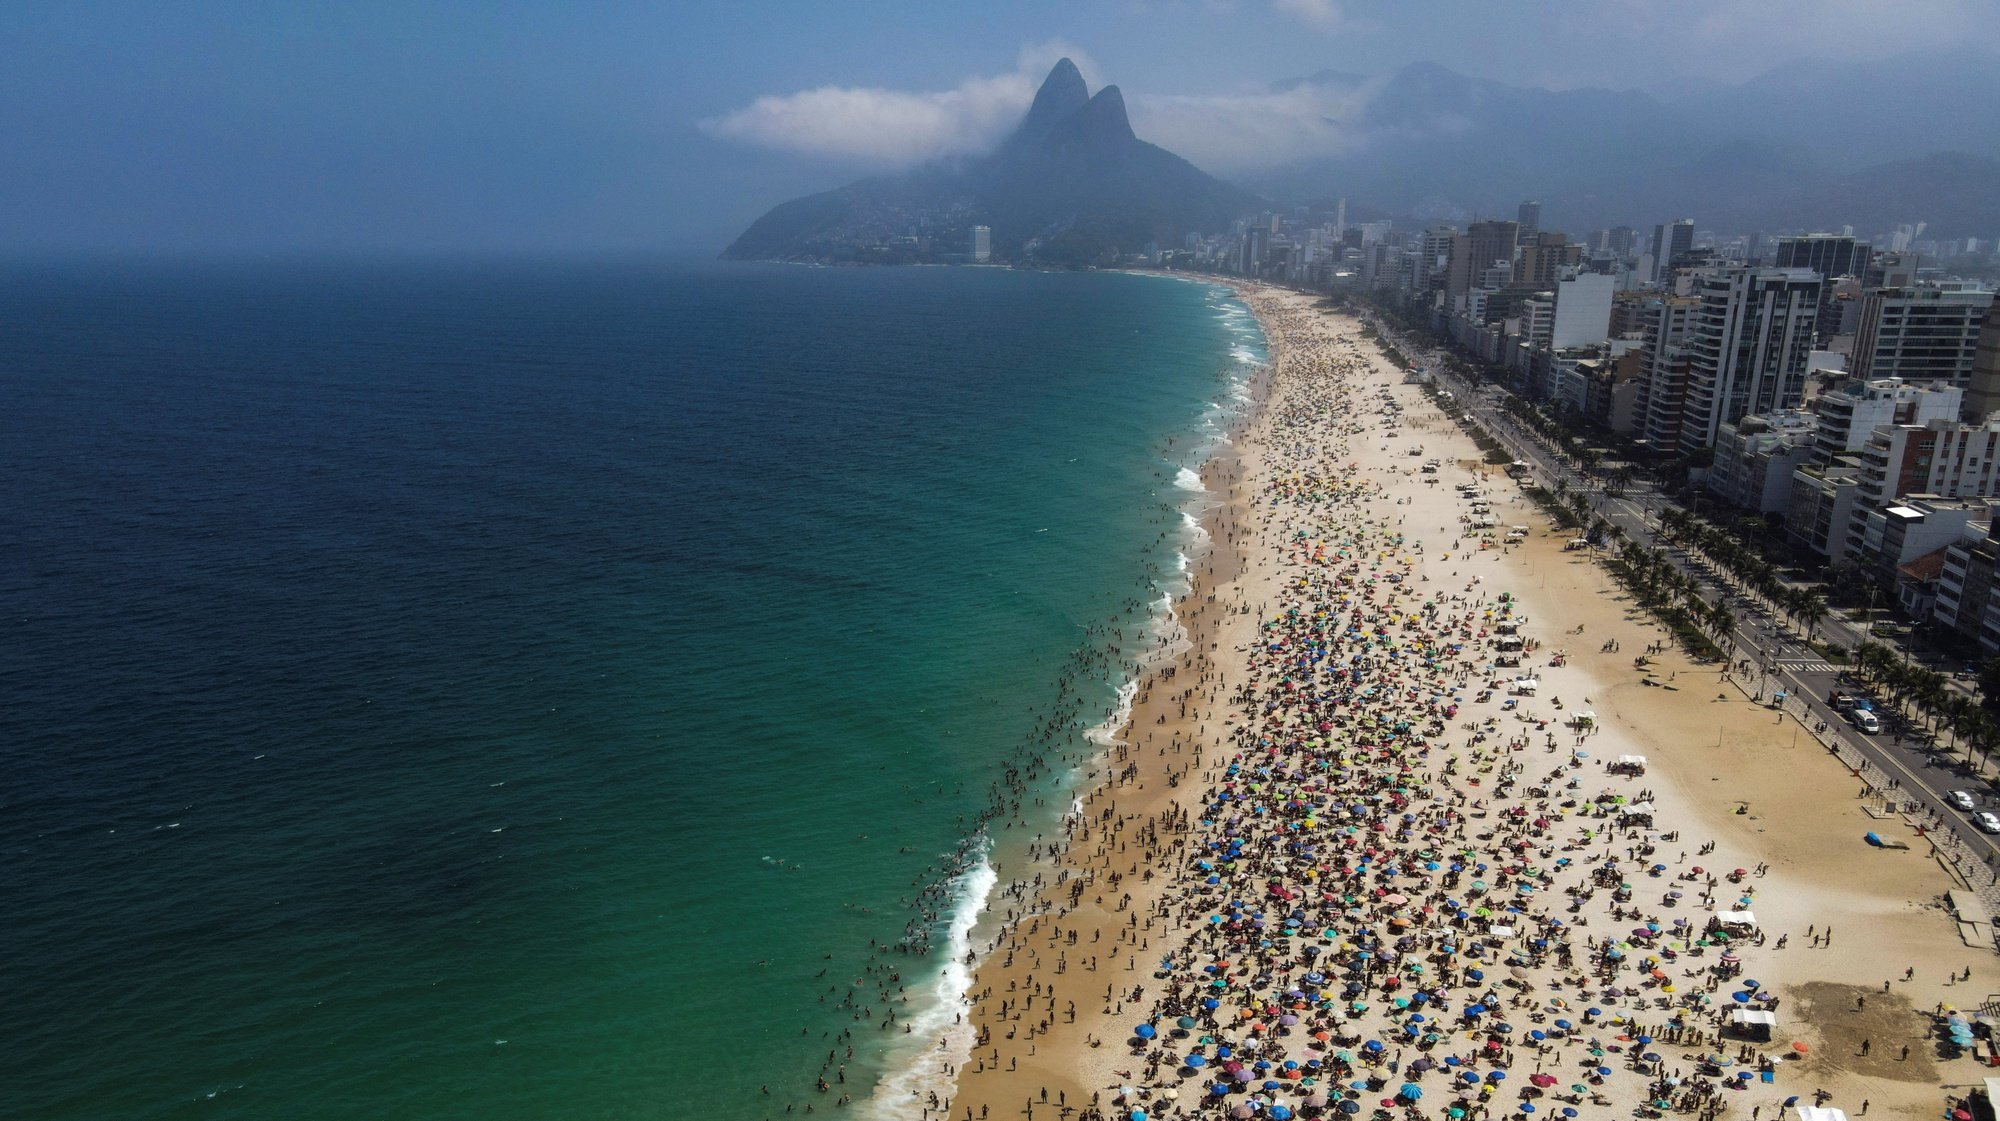 epa08666924 Aerial view of the crowded Ipanema beach in Rio de Janeiro, Brazil, 13 September 2020. Paying less attention to measures to control coronavirus spreading, visitors have crowded Ipanema and Copacabana beaches in Rio de Janeiro.  EPA/Antonio Lacerda